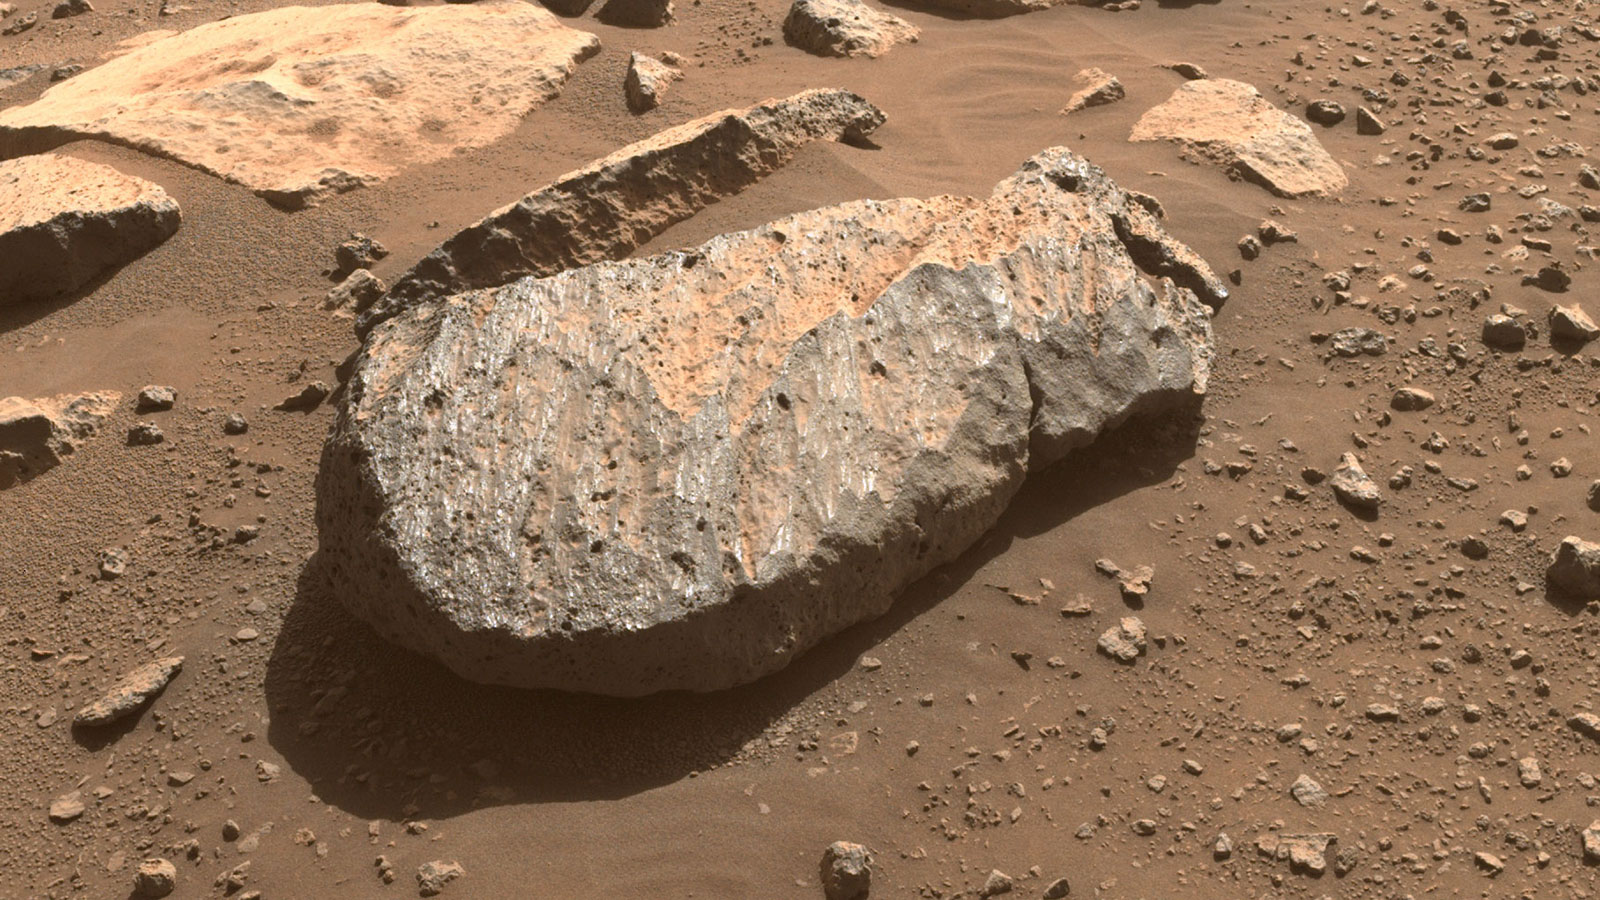 Perseverance at ‘Rochette’: A close-up of the rock, nicknamed “Rochette,” that the Perseverance science team will examine in order to determine whether to take a rock core sample from it. 